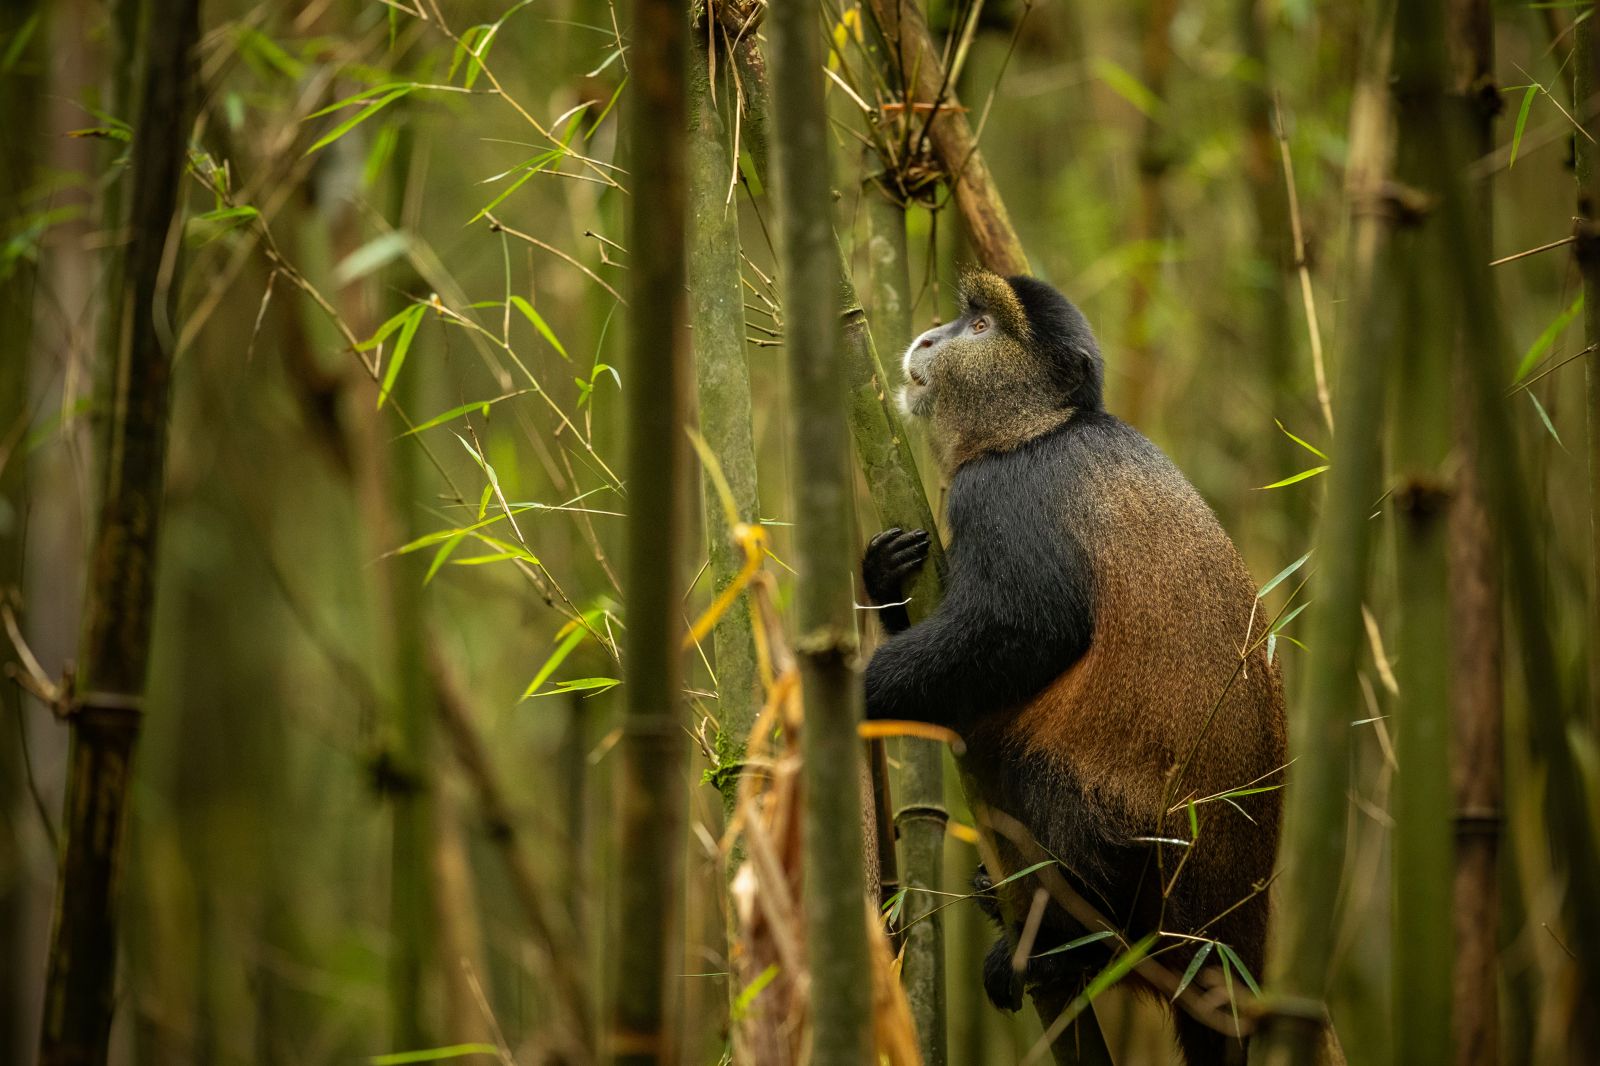 Golden monkey partially concealed by branches in a bamboo forest in Uganda